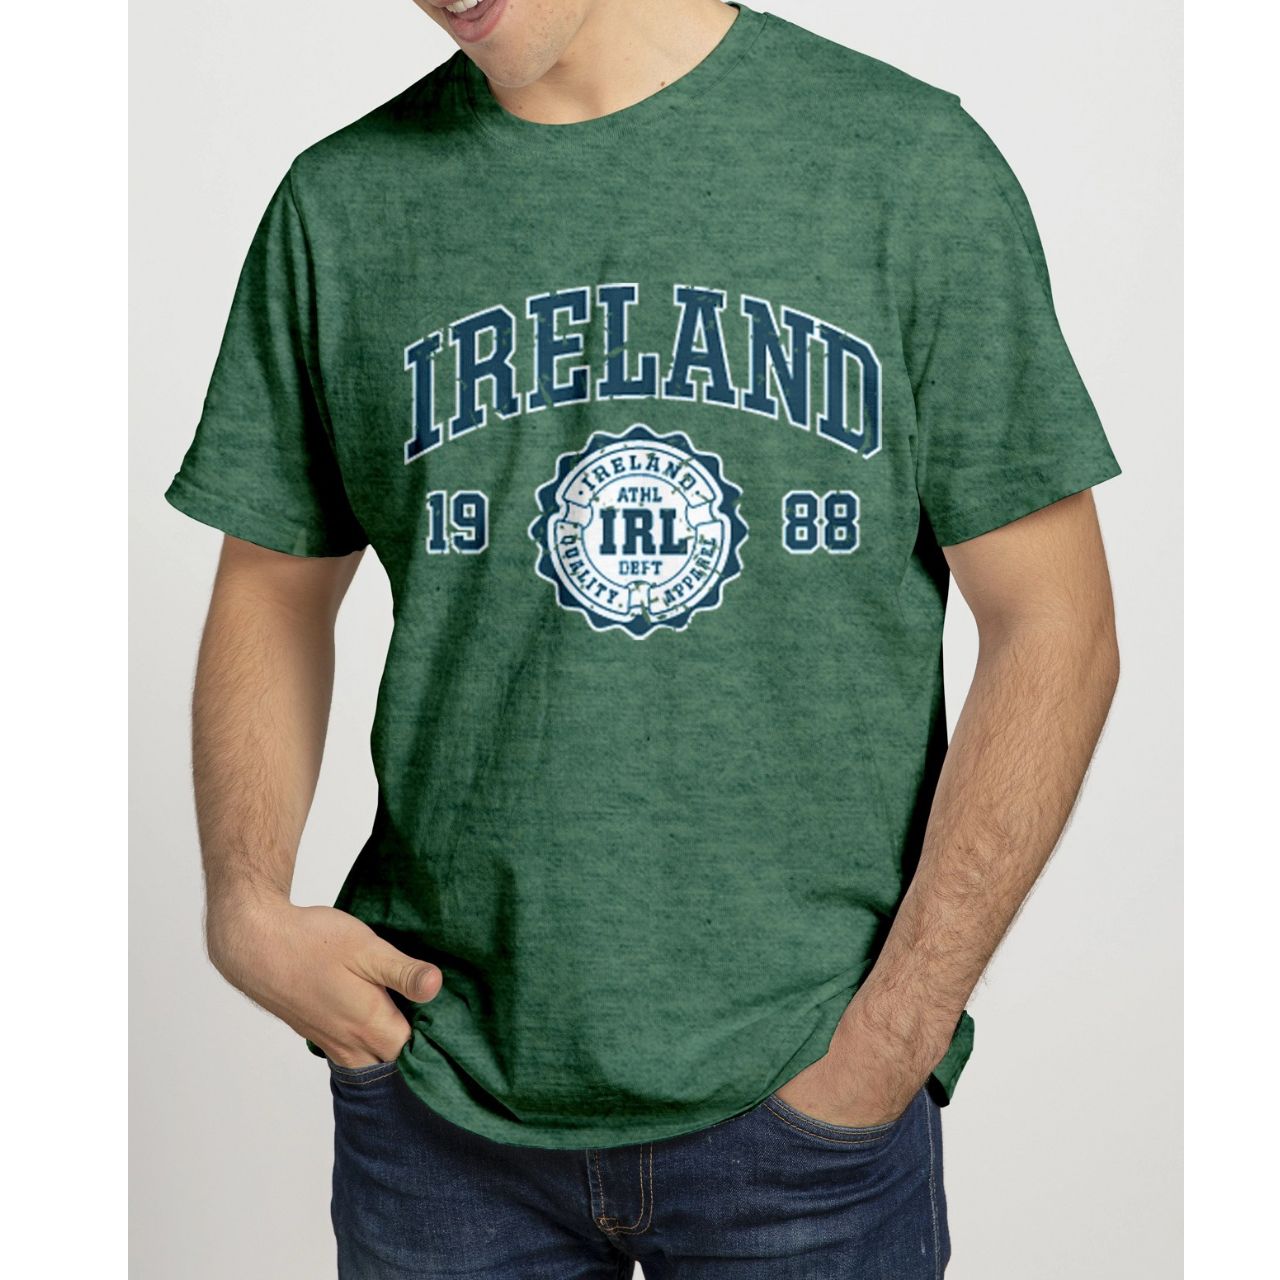 Cara Craft Green Ireland Athletic Department Apparel 88 T-Shirt  - 70% cotton, 30% polyester - Crew Neck - Designed And Printed in Ireland By Cara craft - Machine Washable